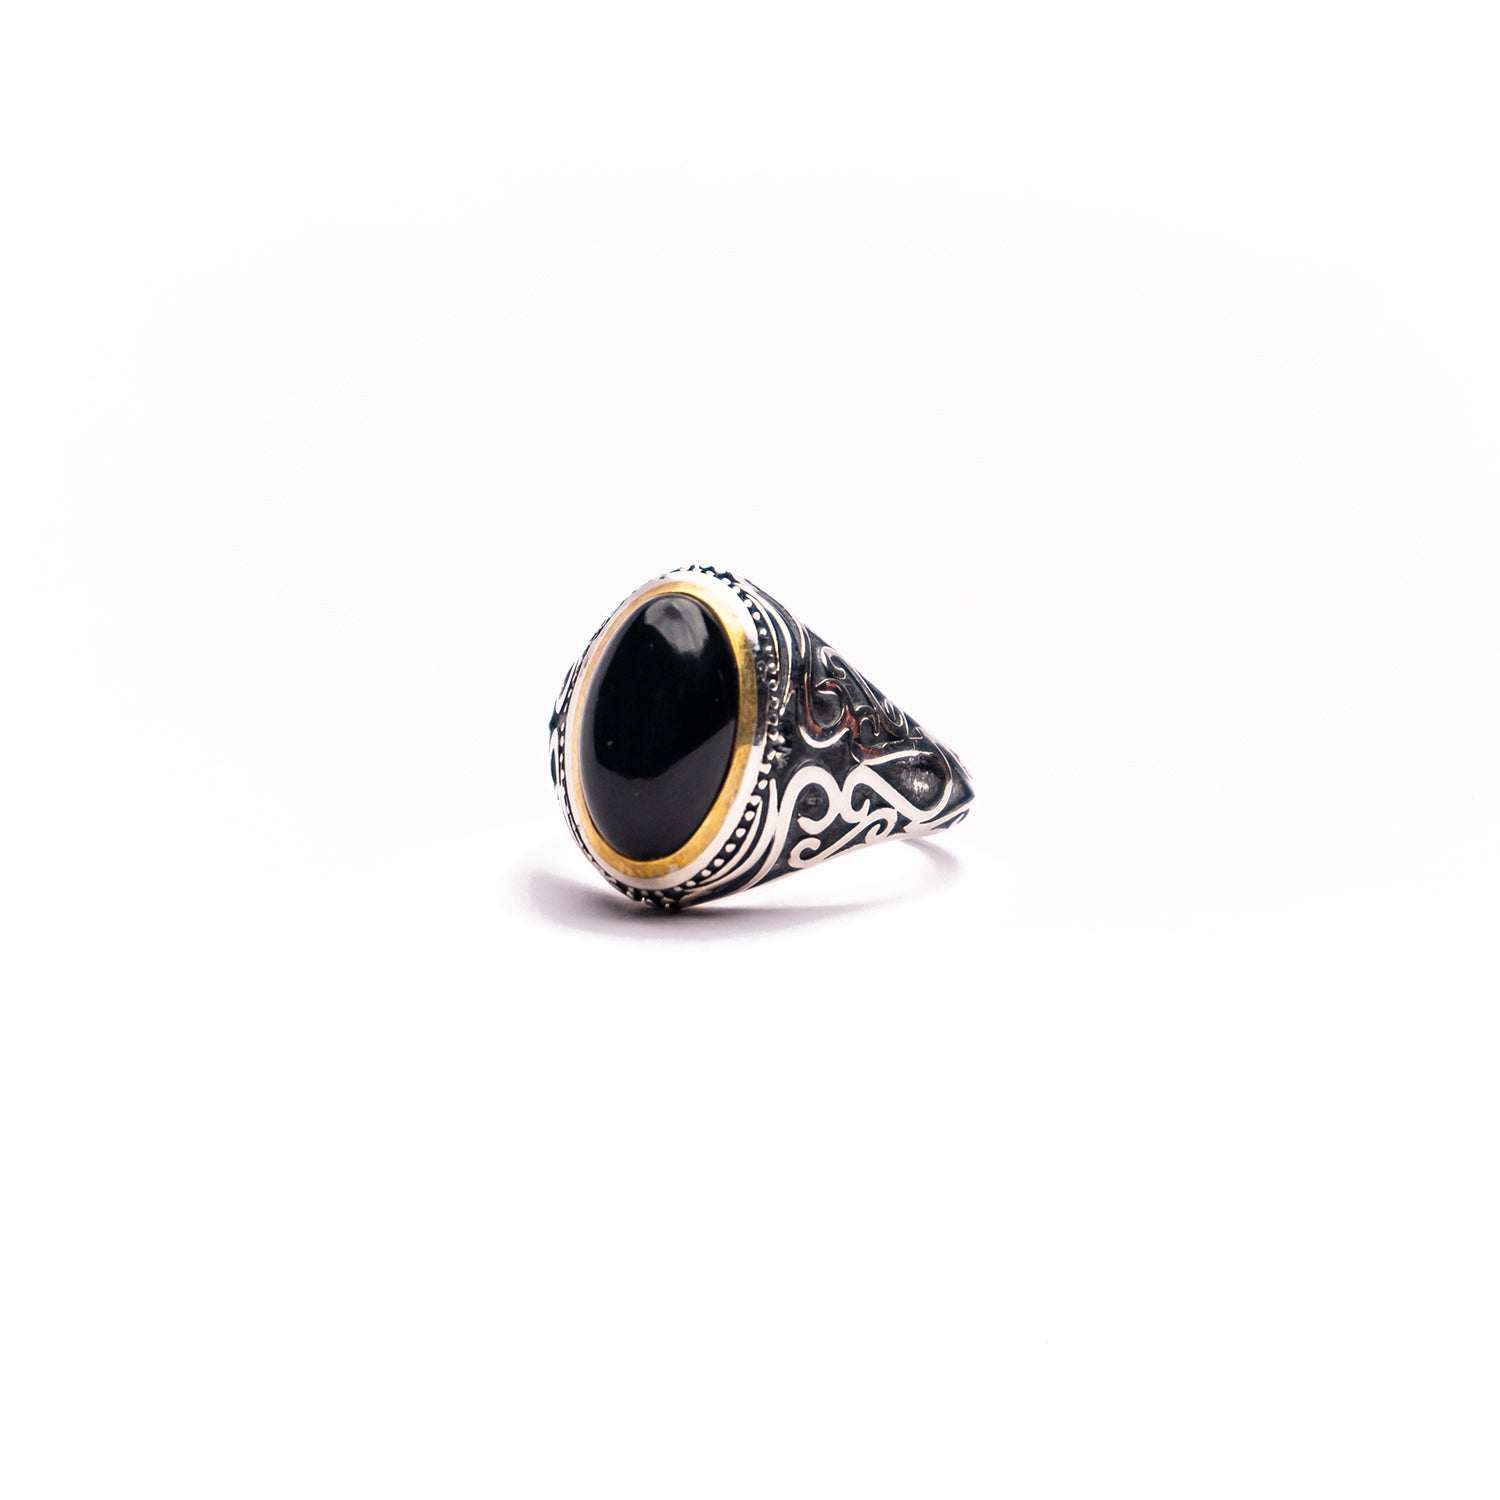 Vintage Filigree Ring  IN 925 Sterling silver with Black Onyx Stone